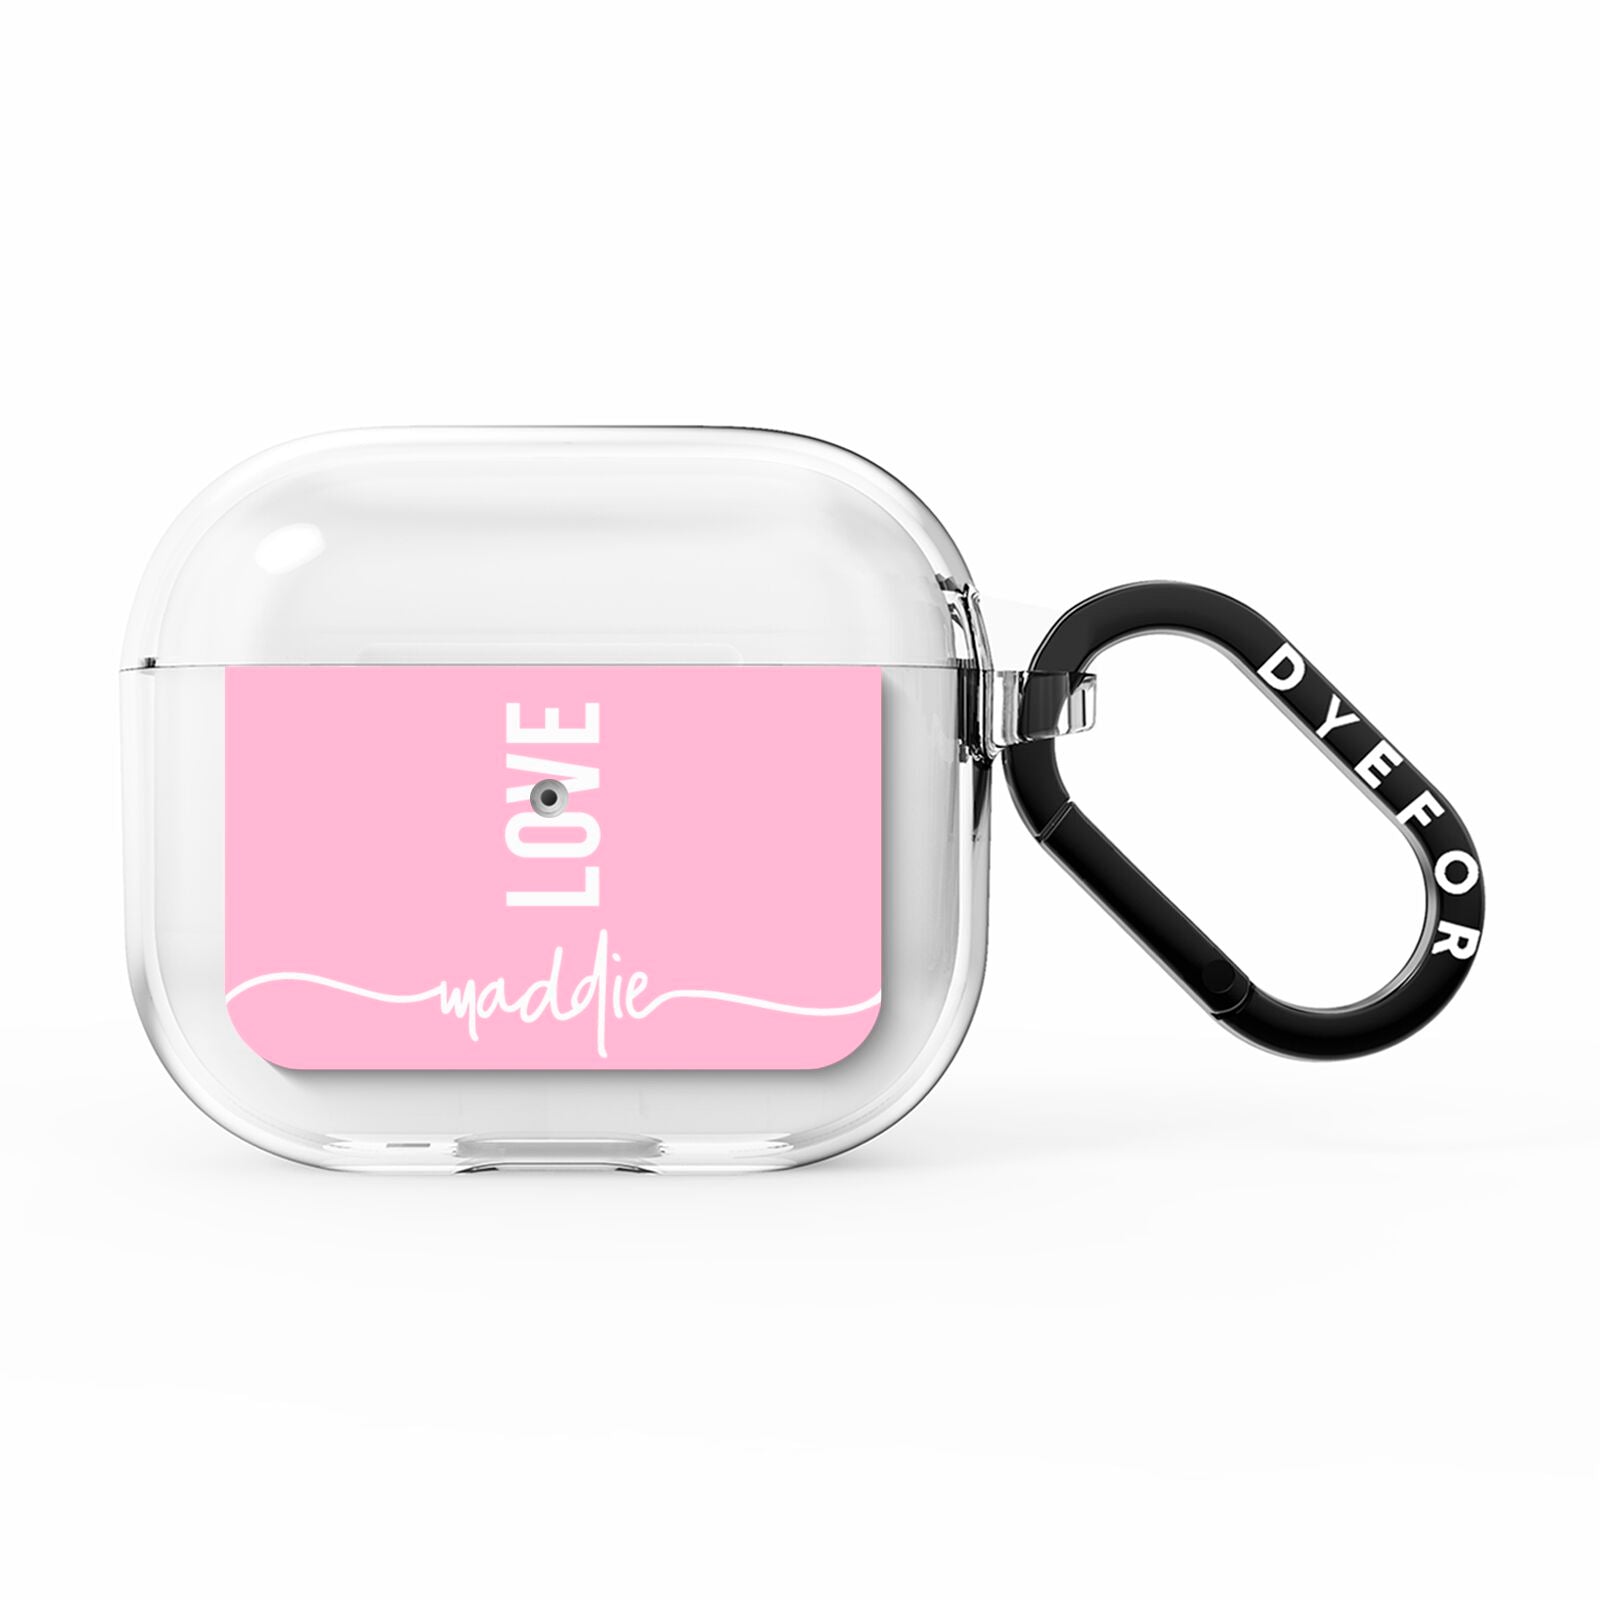 Personalised Love See Through Name AirPods Clear Case 3rd Gen